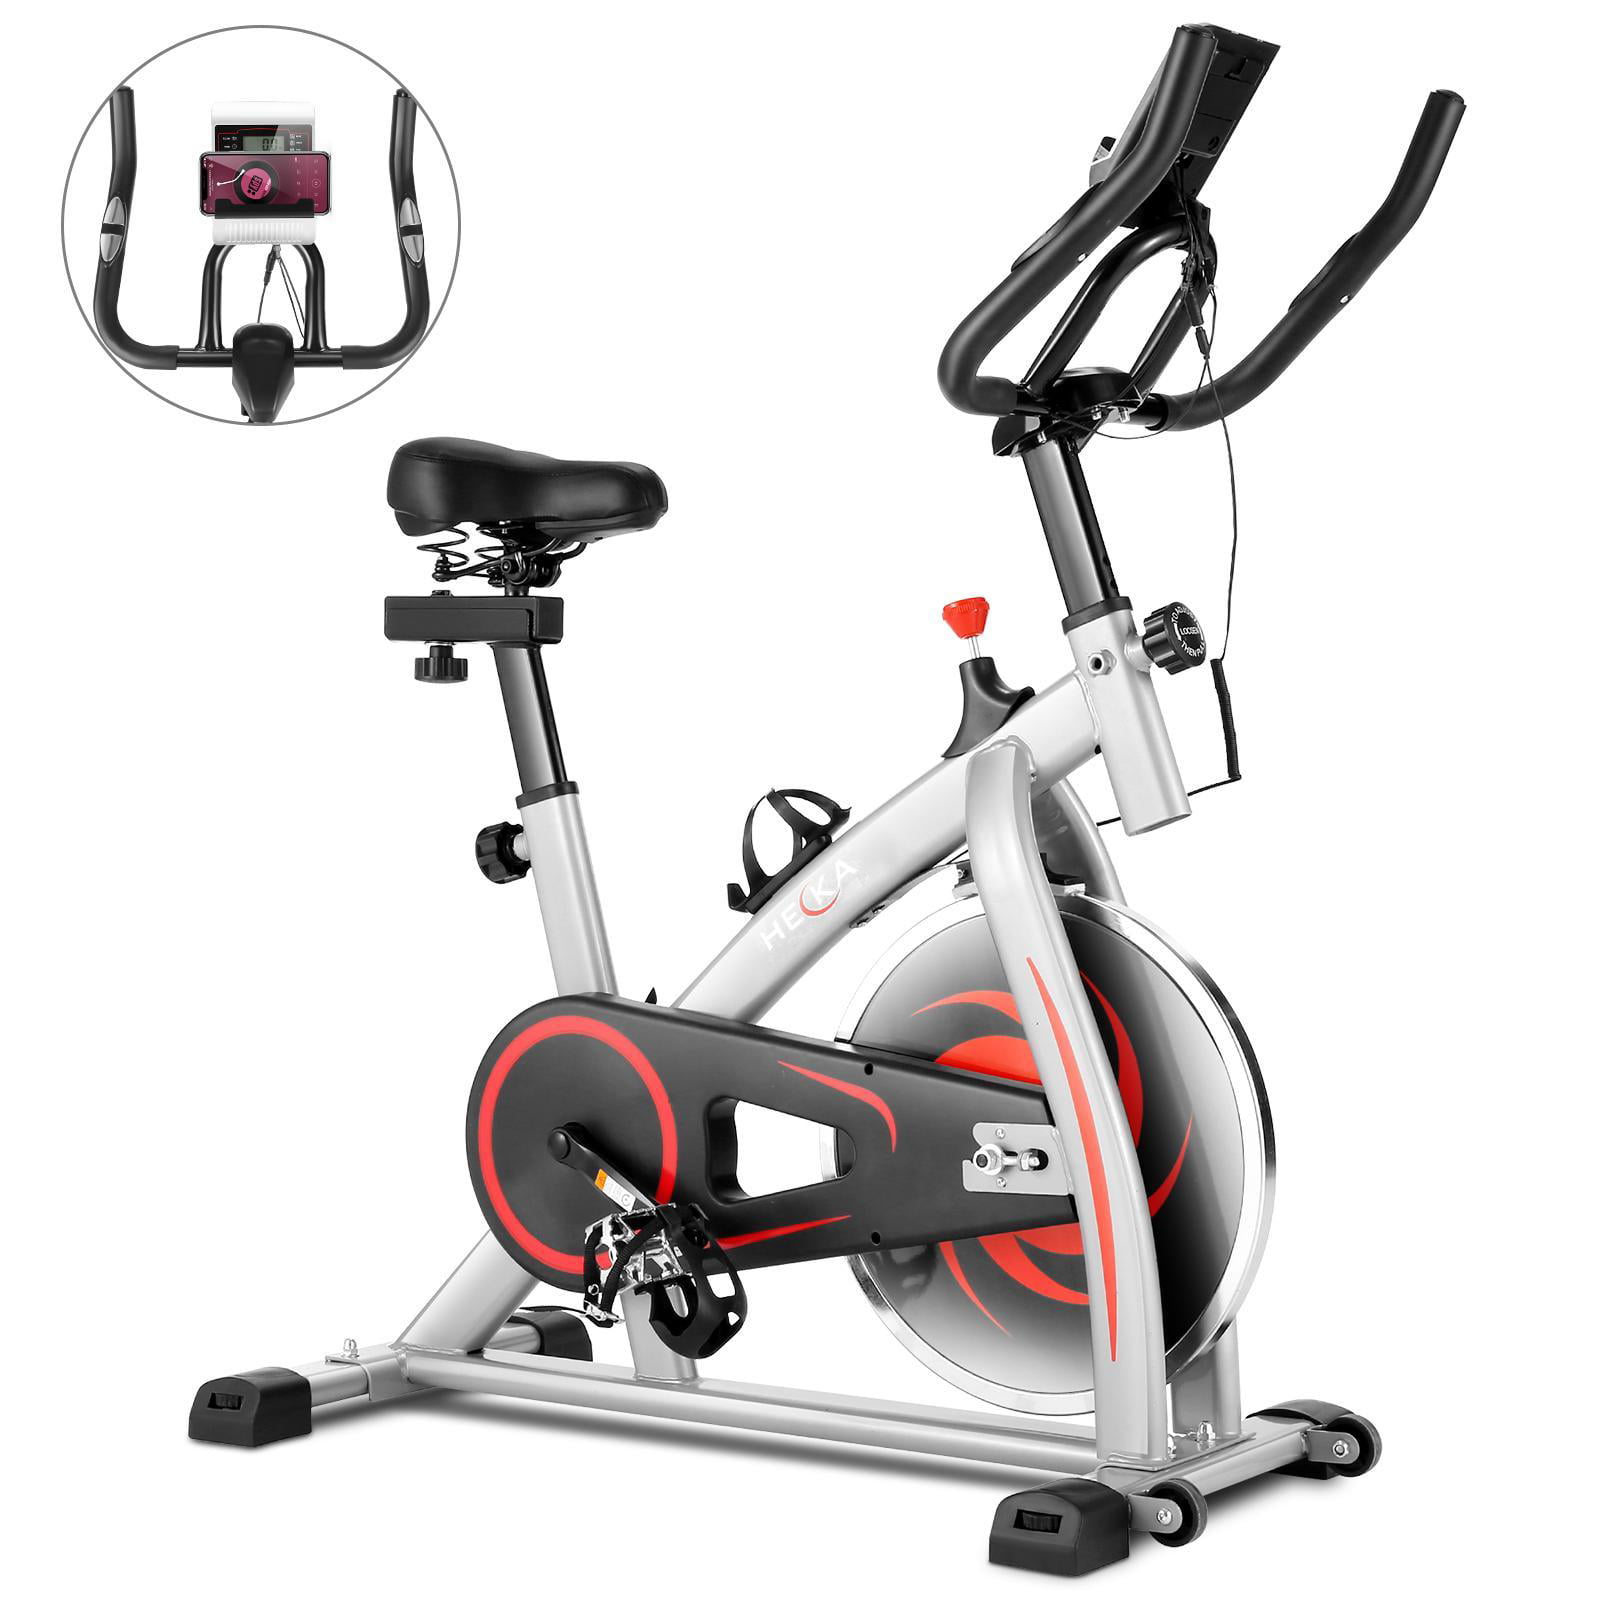 Details about   LCD Indoor Exercise Bike Stationary Cycling Bicycle Cardio Fitness Gym Workout 